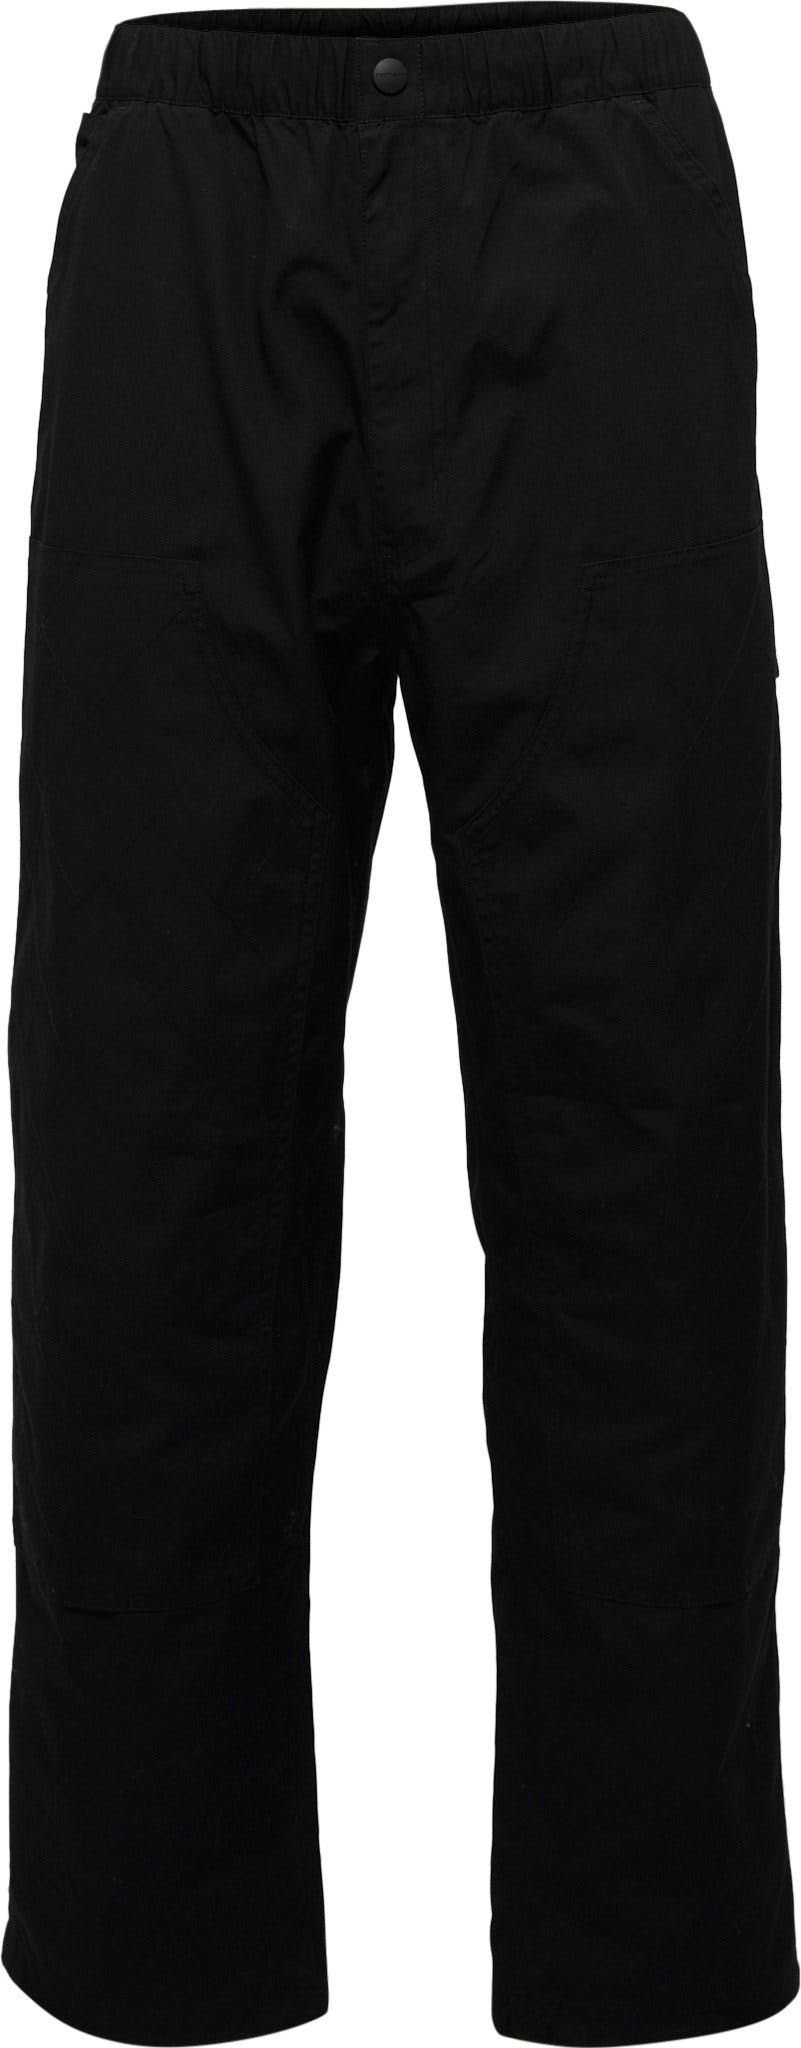 Product image for Tyler Pant - Men's